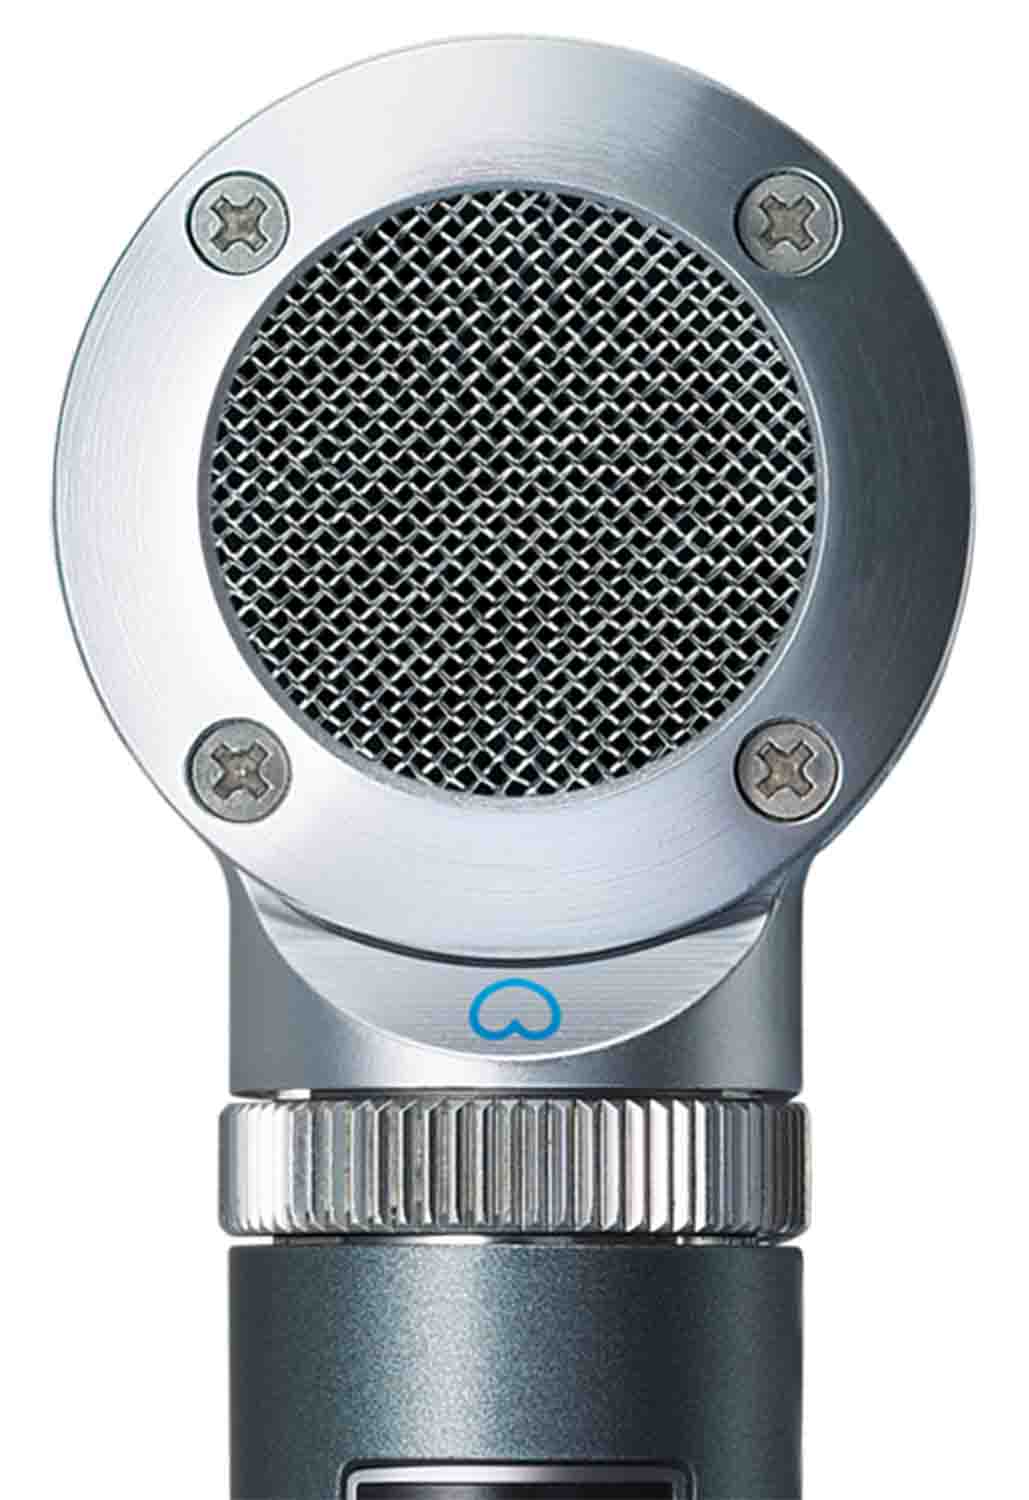 Shure BETA 181/C, Ultra-Compact Side-Address Instrument Microphone Cardioid Pattern by Shure